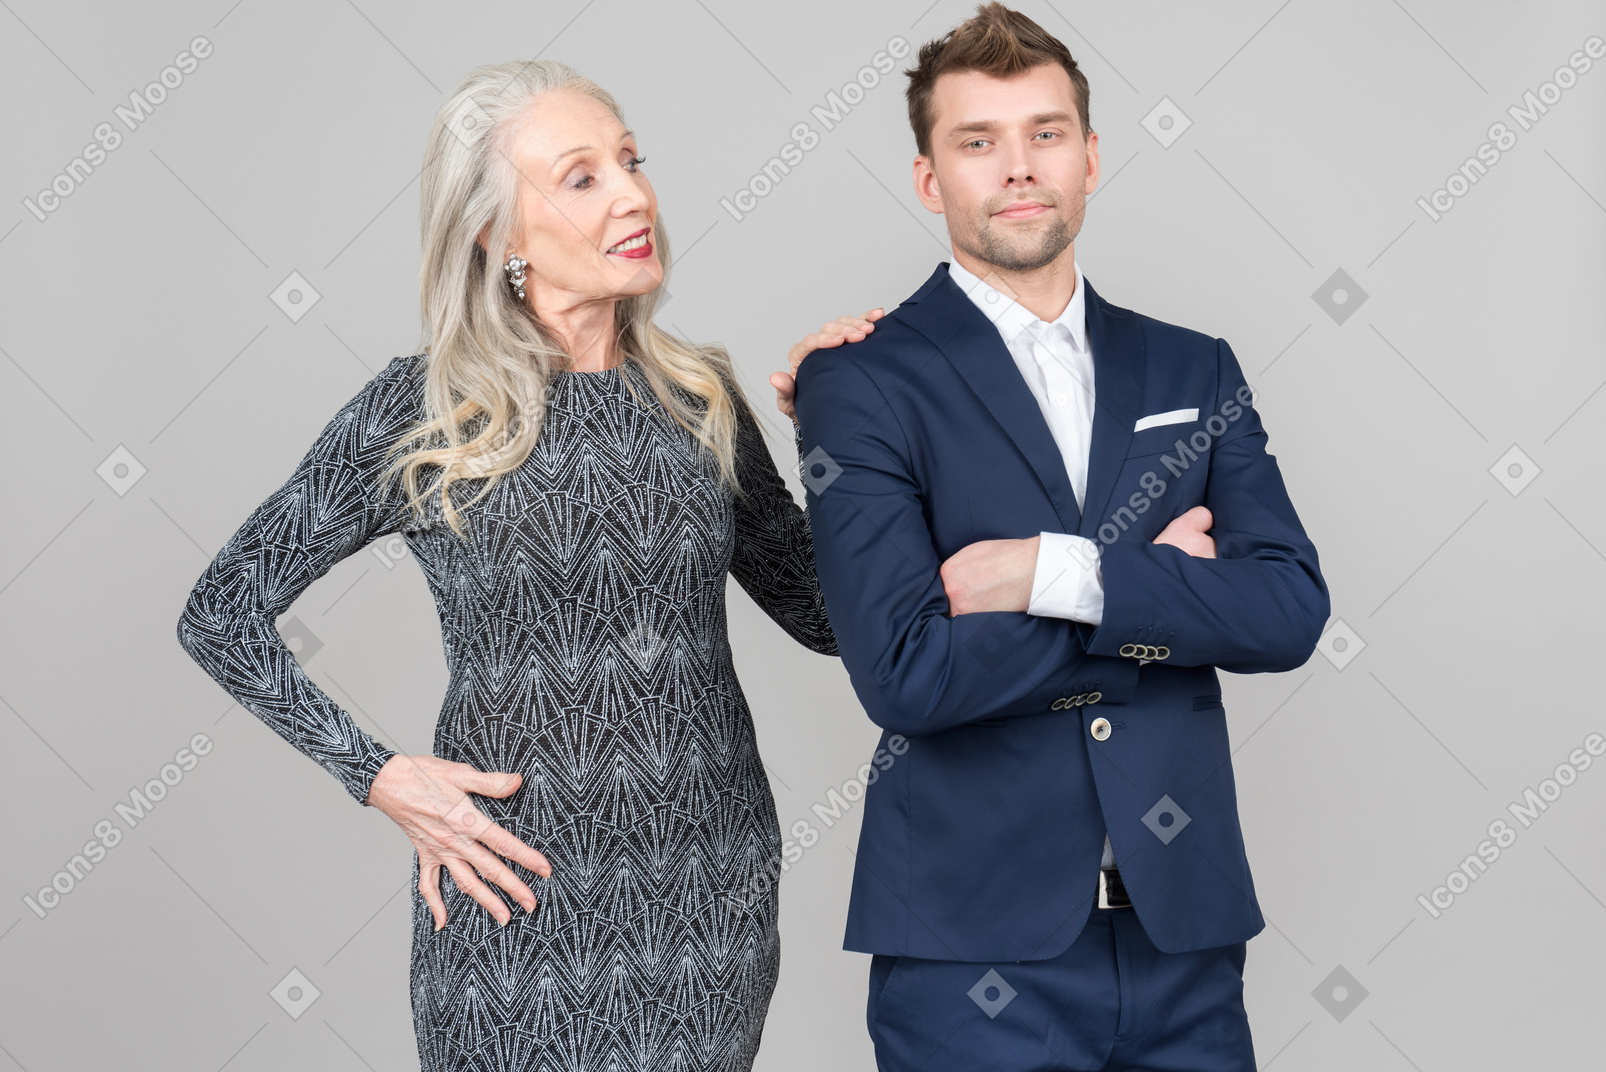 Old woman leaning hand on her young boyfriend's back